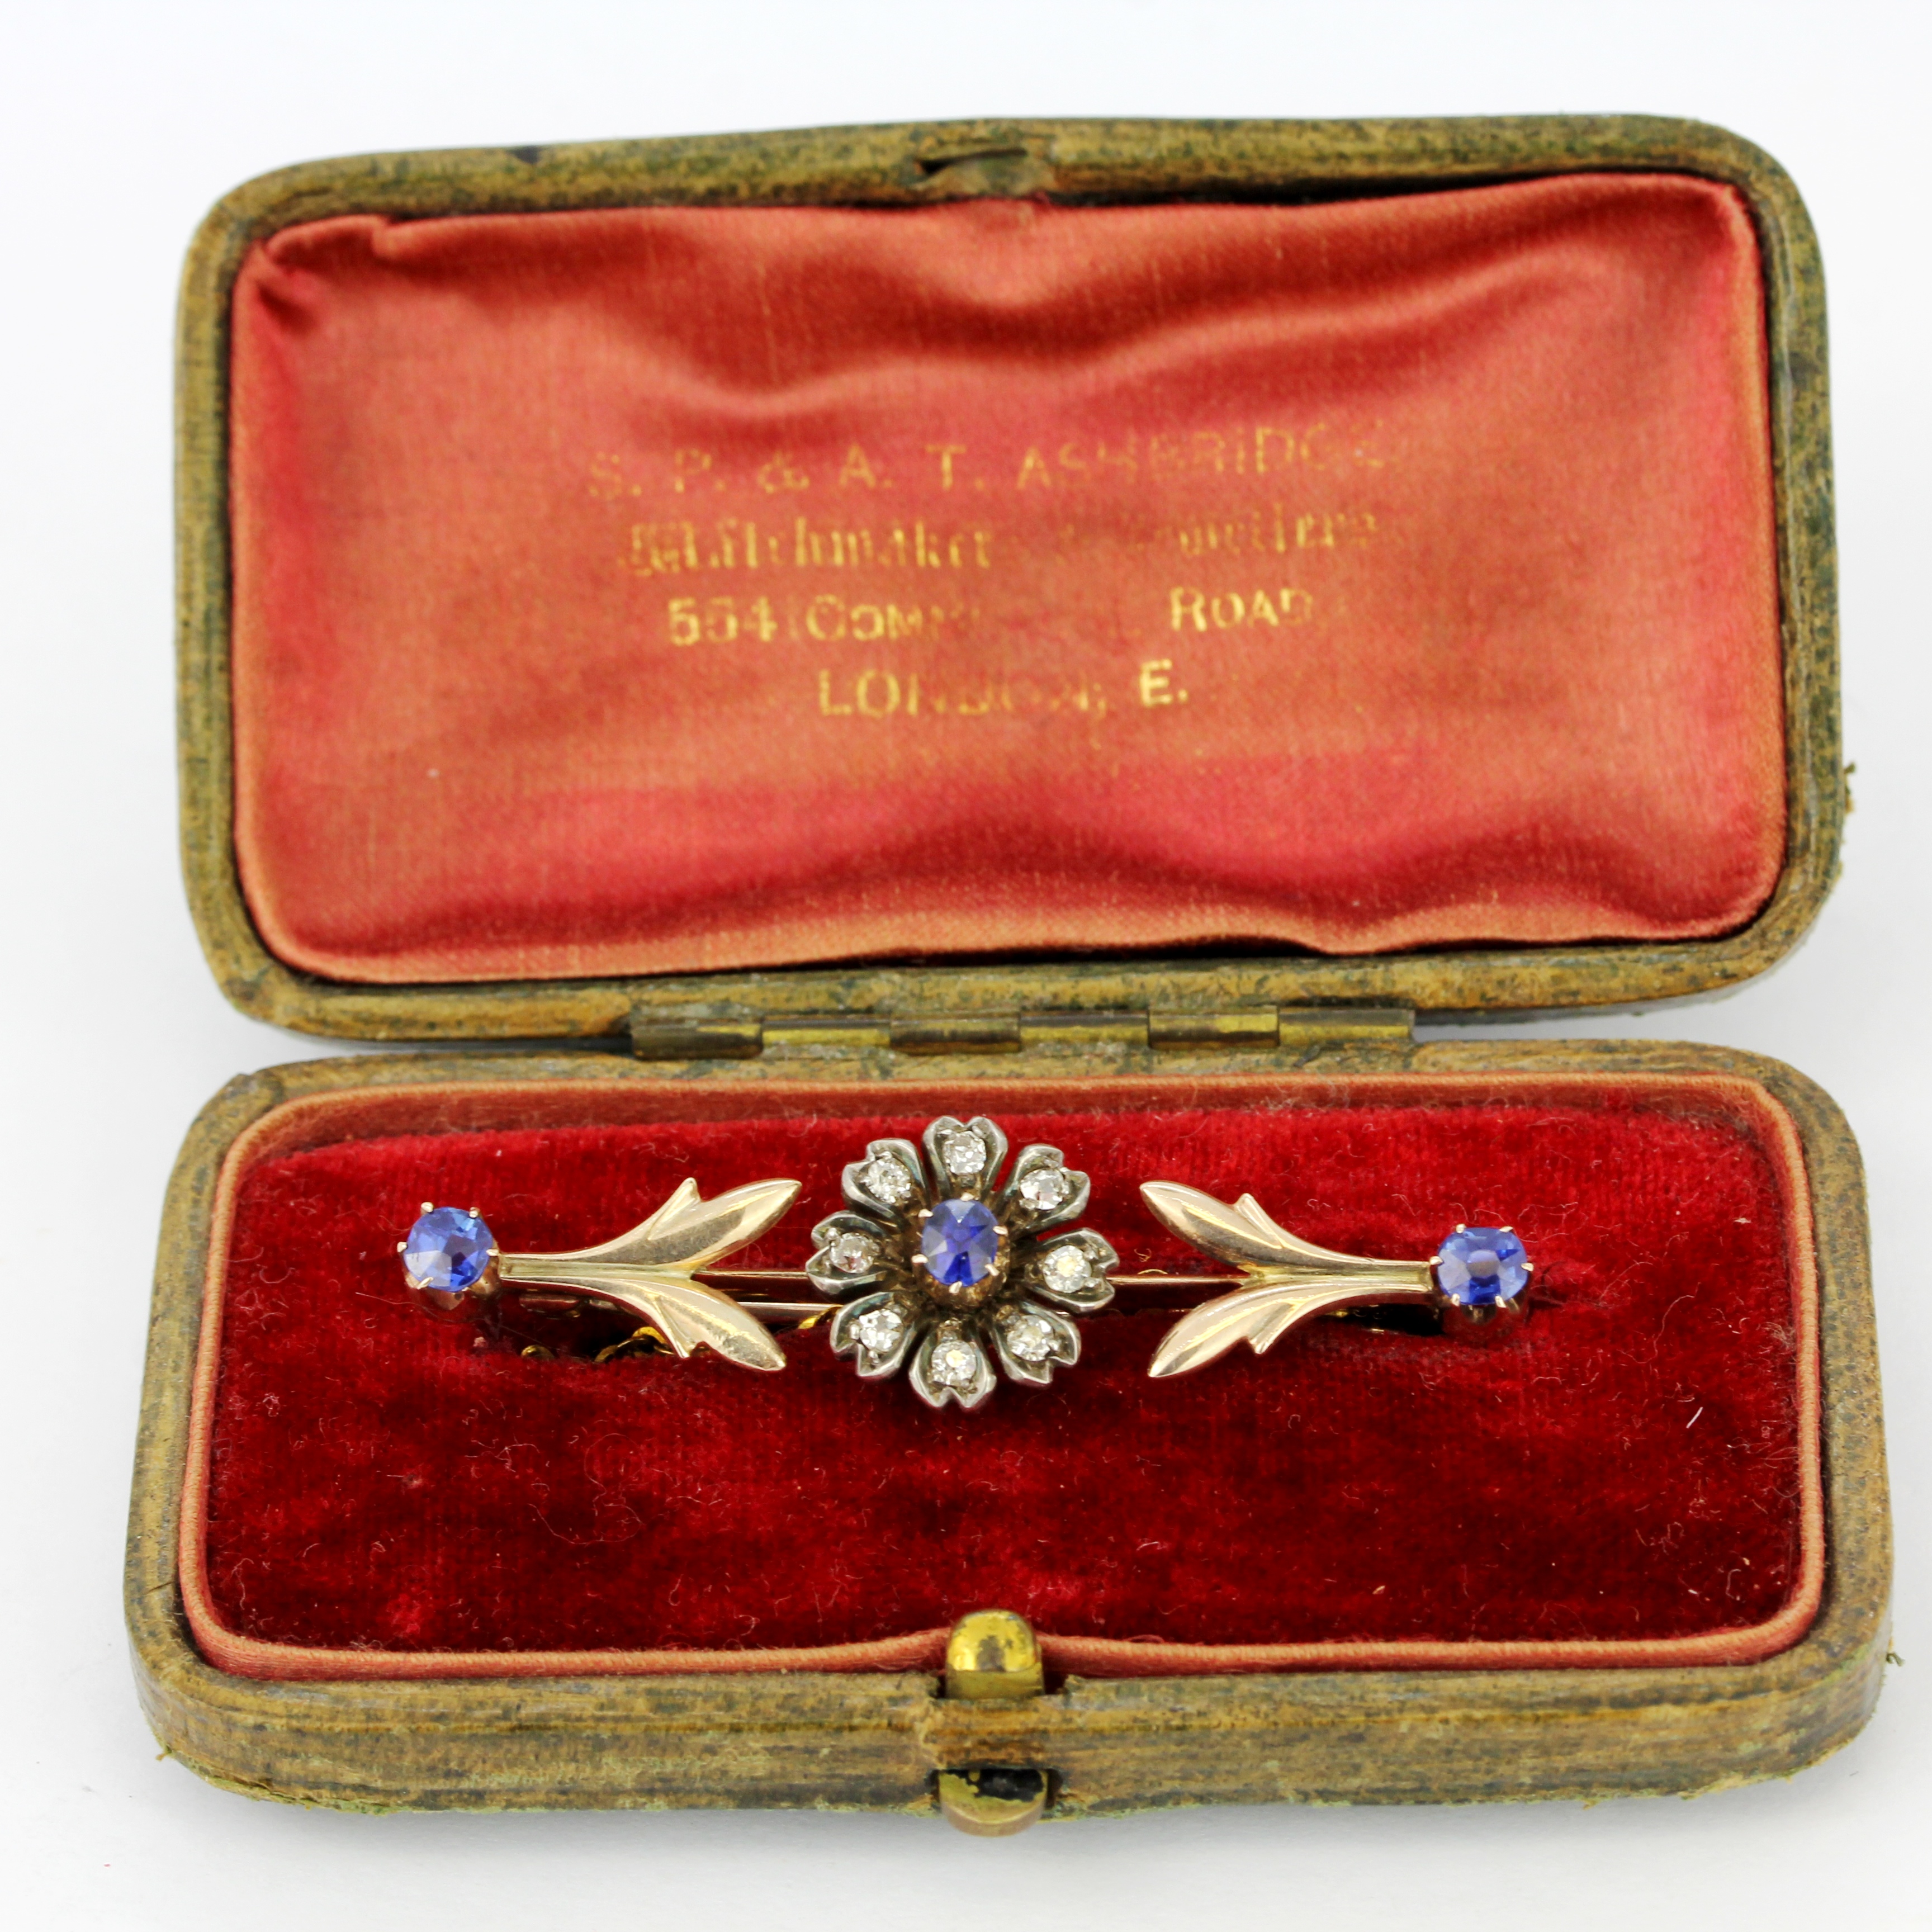 A rose metal (tested minimum 9ct gold) brooch set with sapphires and diamonds, L. 4.5cm. - Image 4 of 4